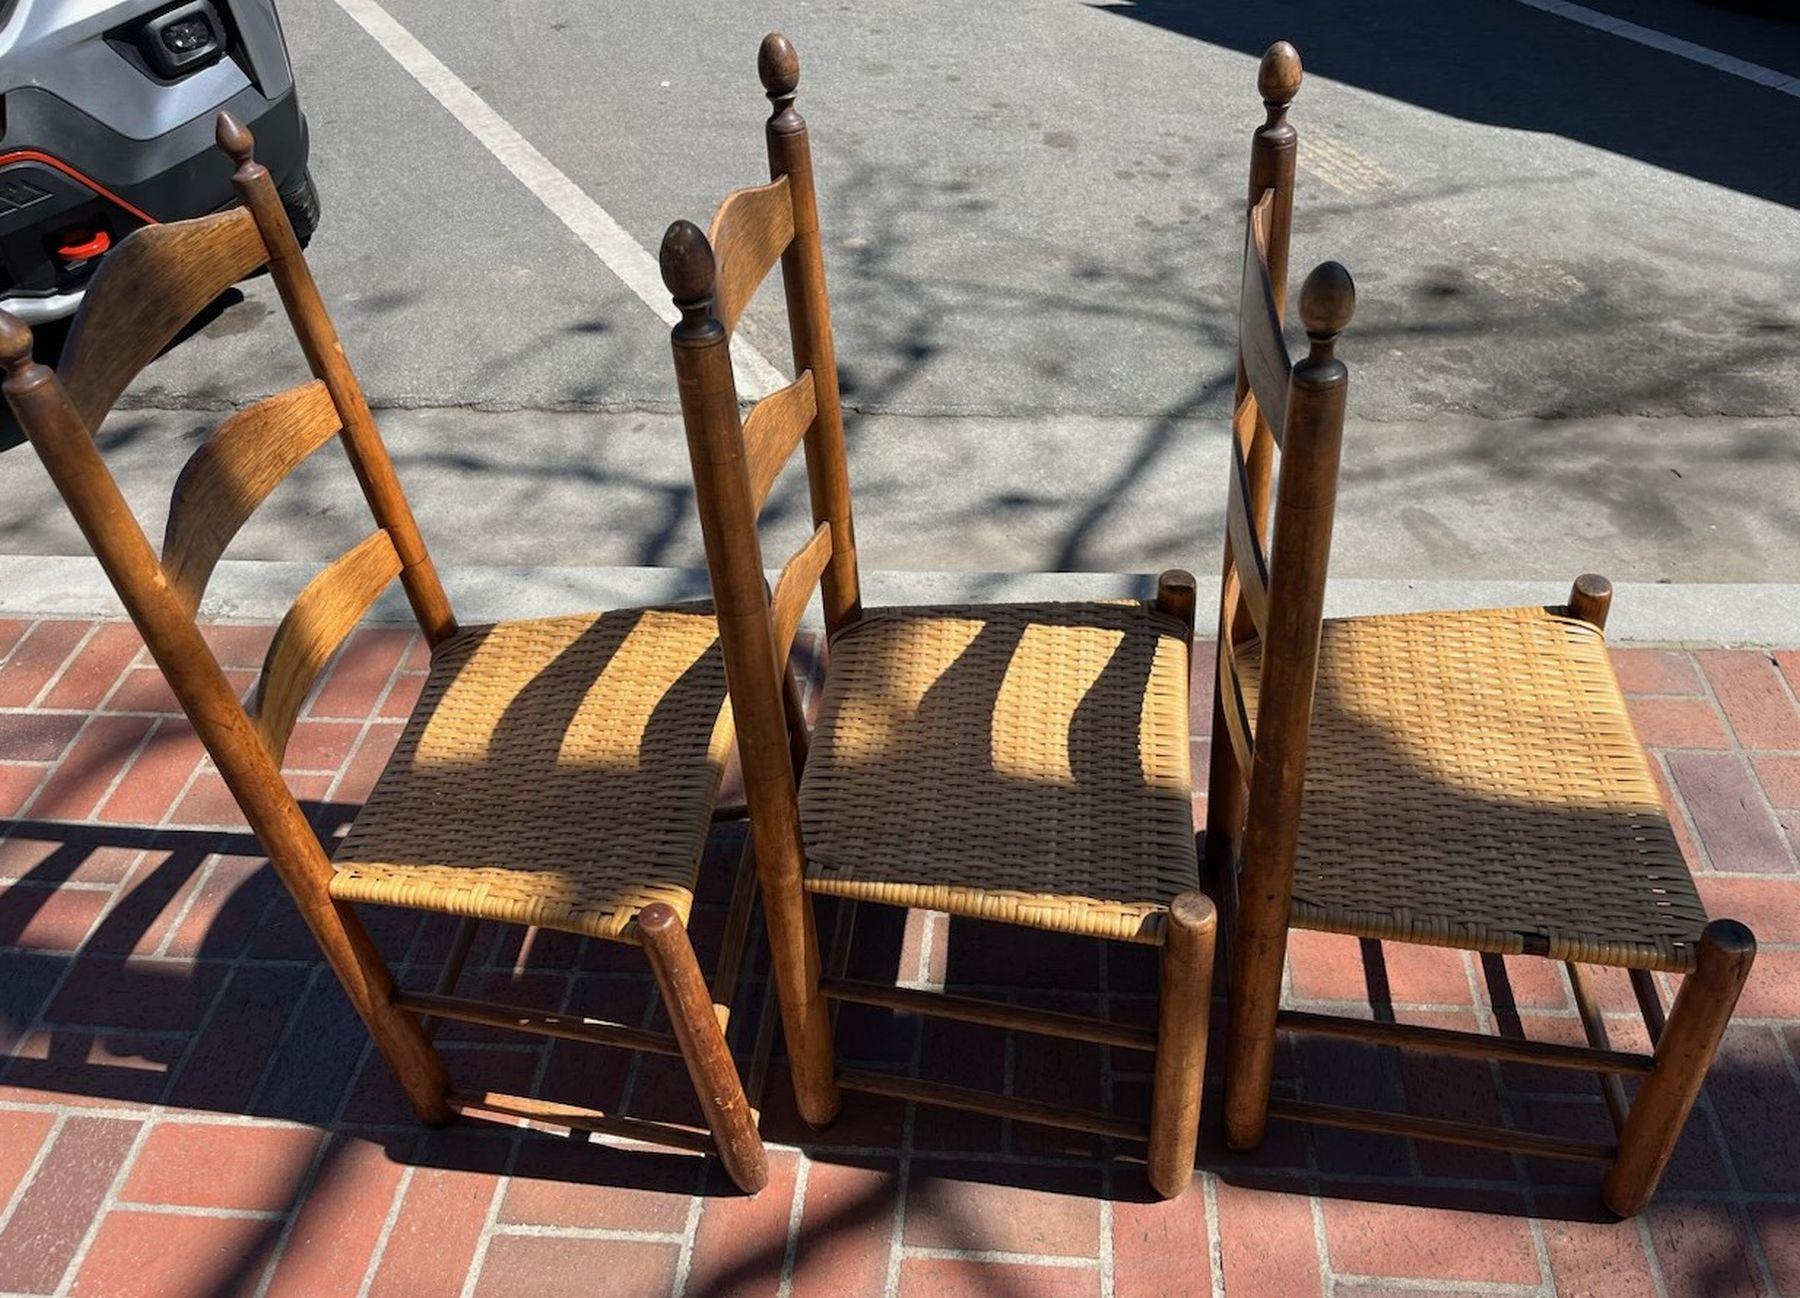 Cane 19thc Ladder Back Chairs From Pennsylvania -Set of Three For Sale